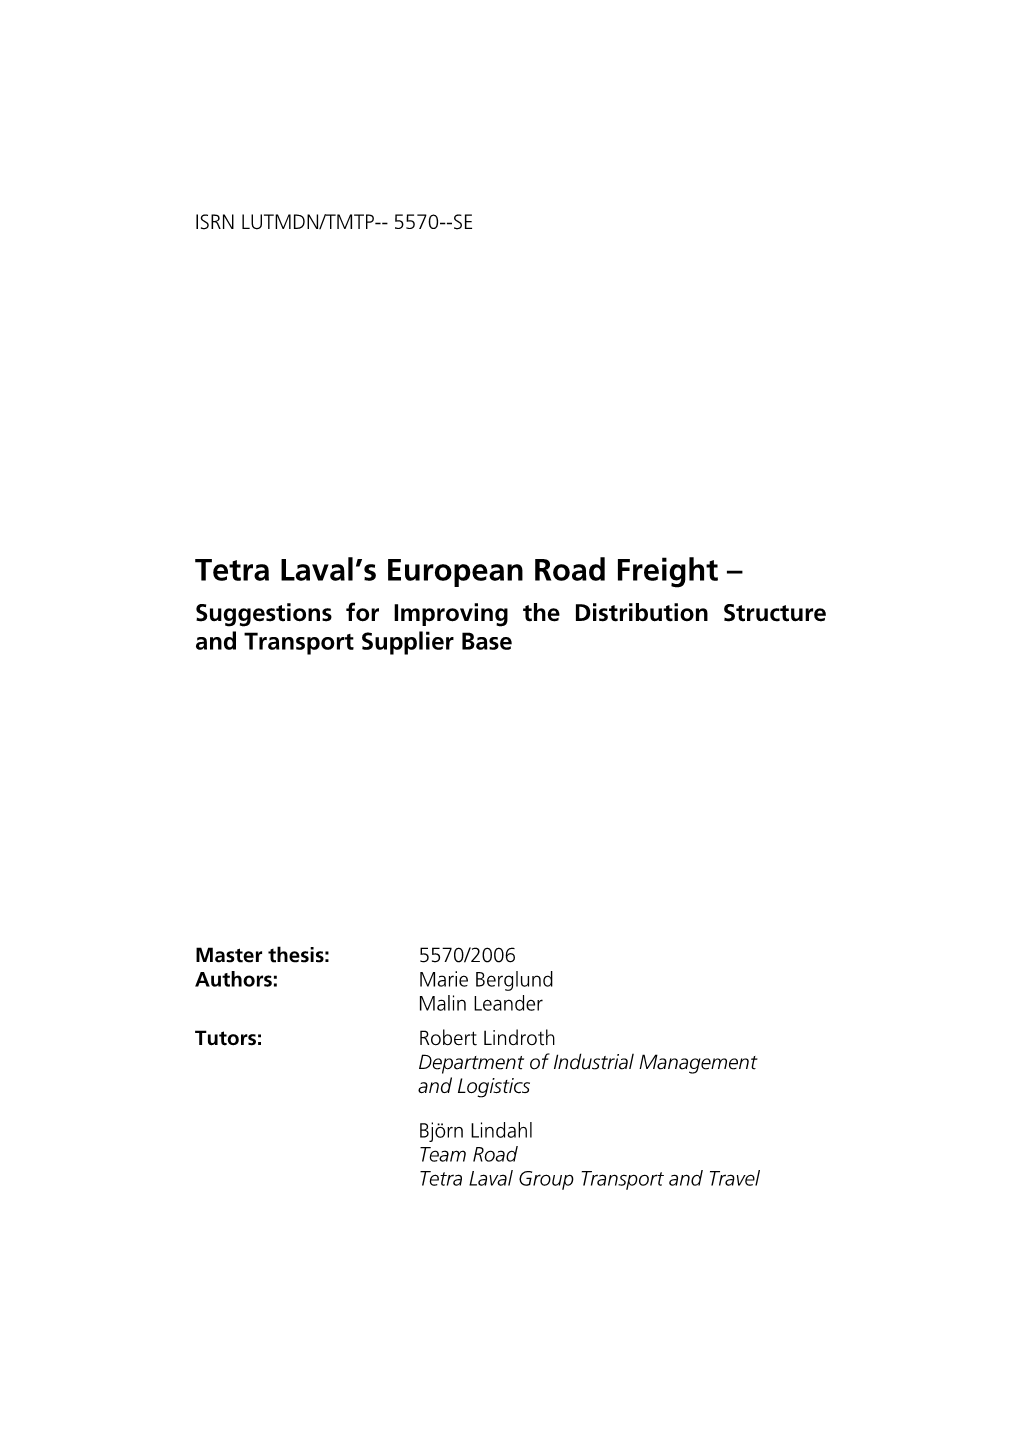 Tetra Laval's European Road Freight – Suggestions for Improving The